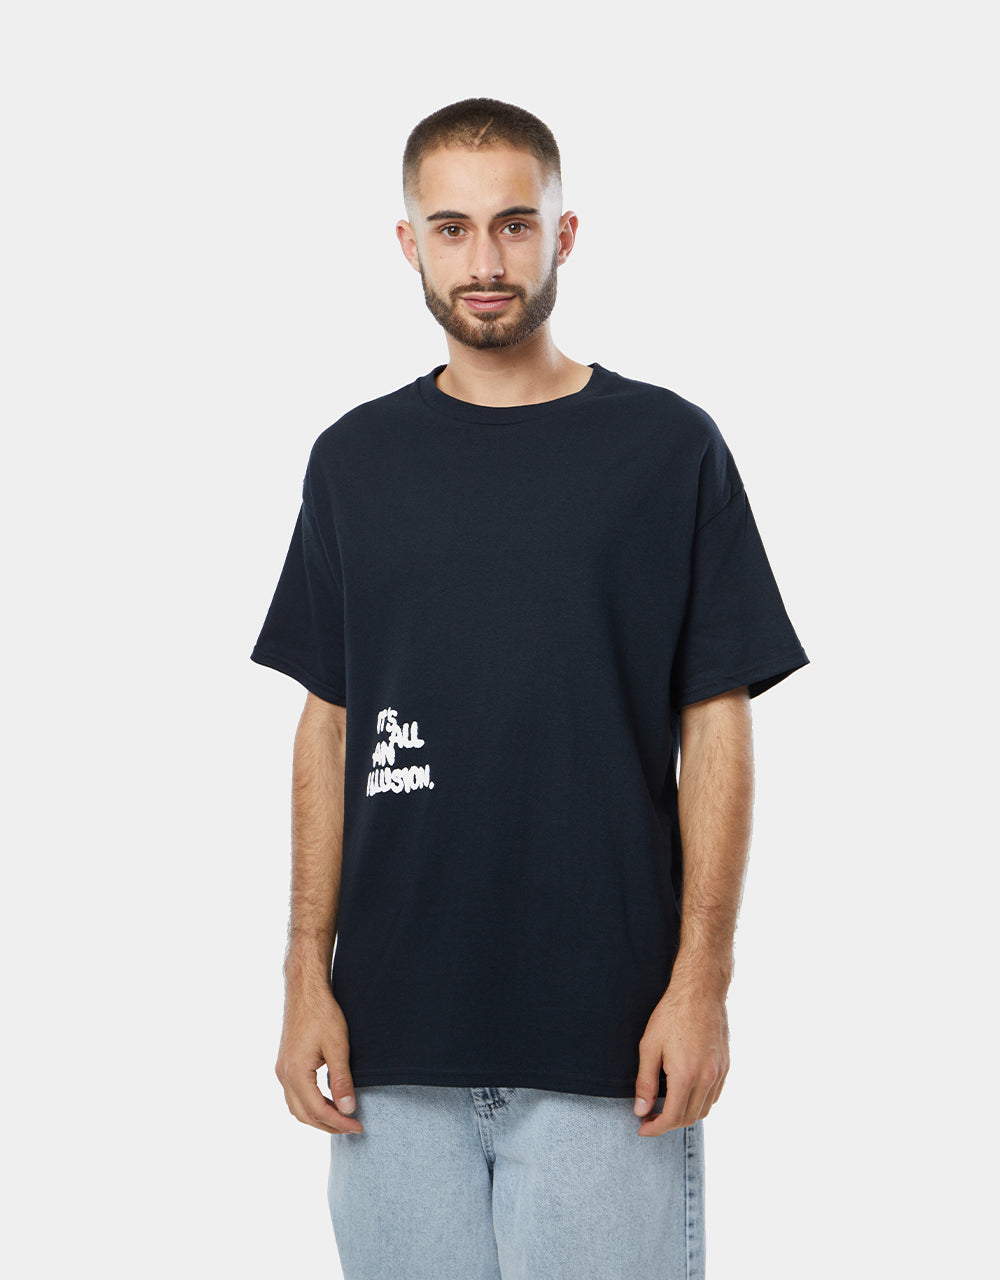 Route One Illusion T-Shirt - Black